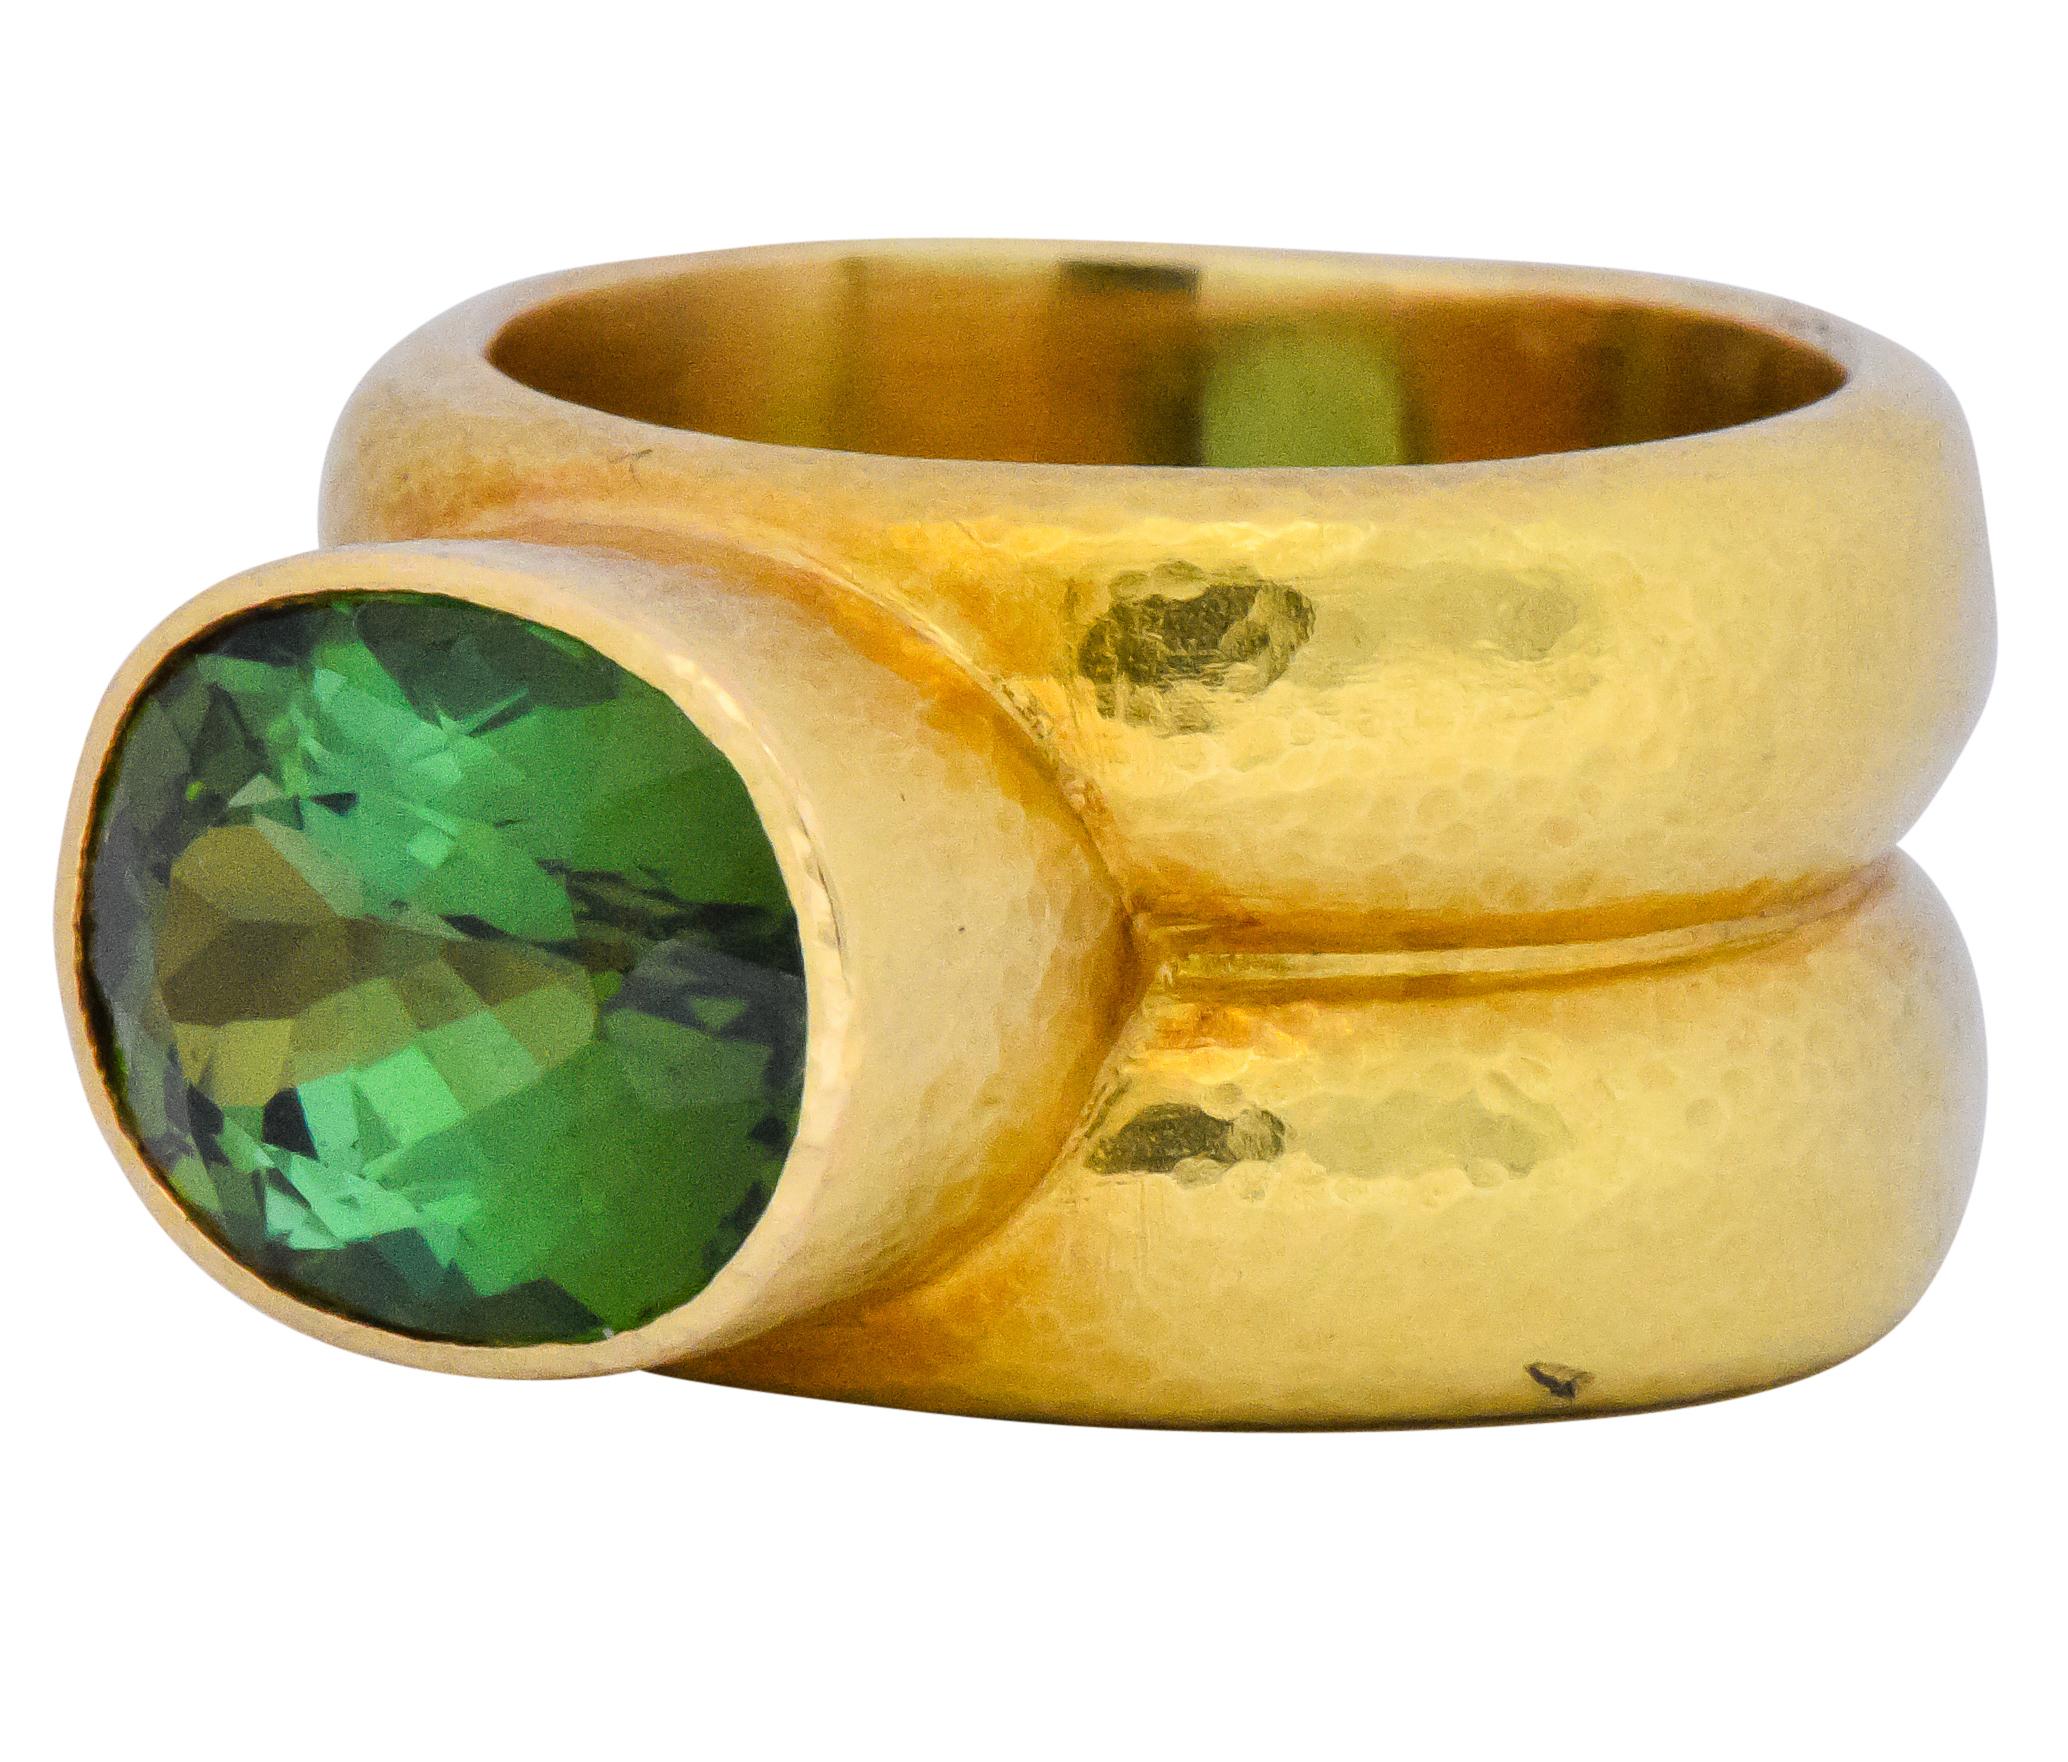 Centering an oval cut tourmaline weighing approximately 4.00 carats

Displaying lively blue and yellow green hues

Bezel set in hammered gold double shank

Tested as 18 Karat

Ring Size: 5 1/2 & not sizable

Top Measures: 9 mm and sits 7 mm